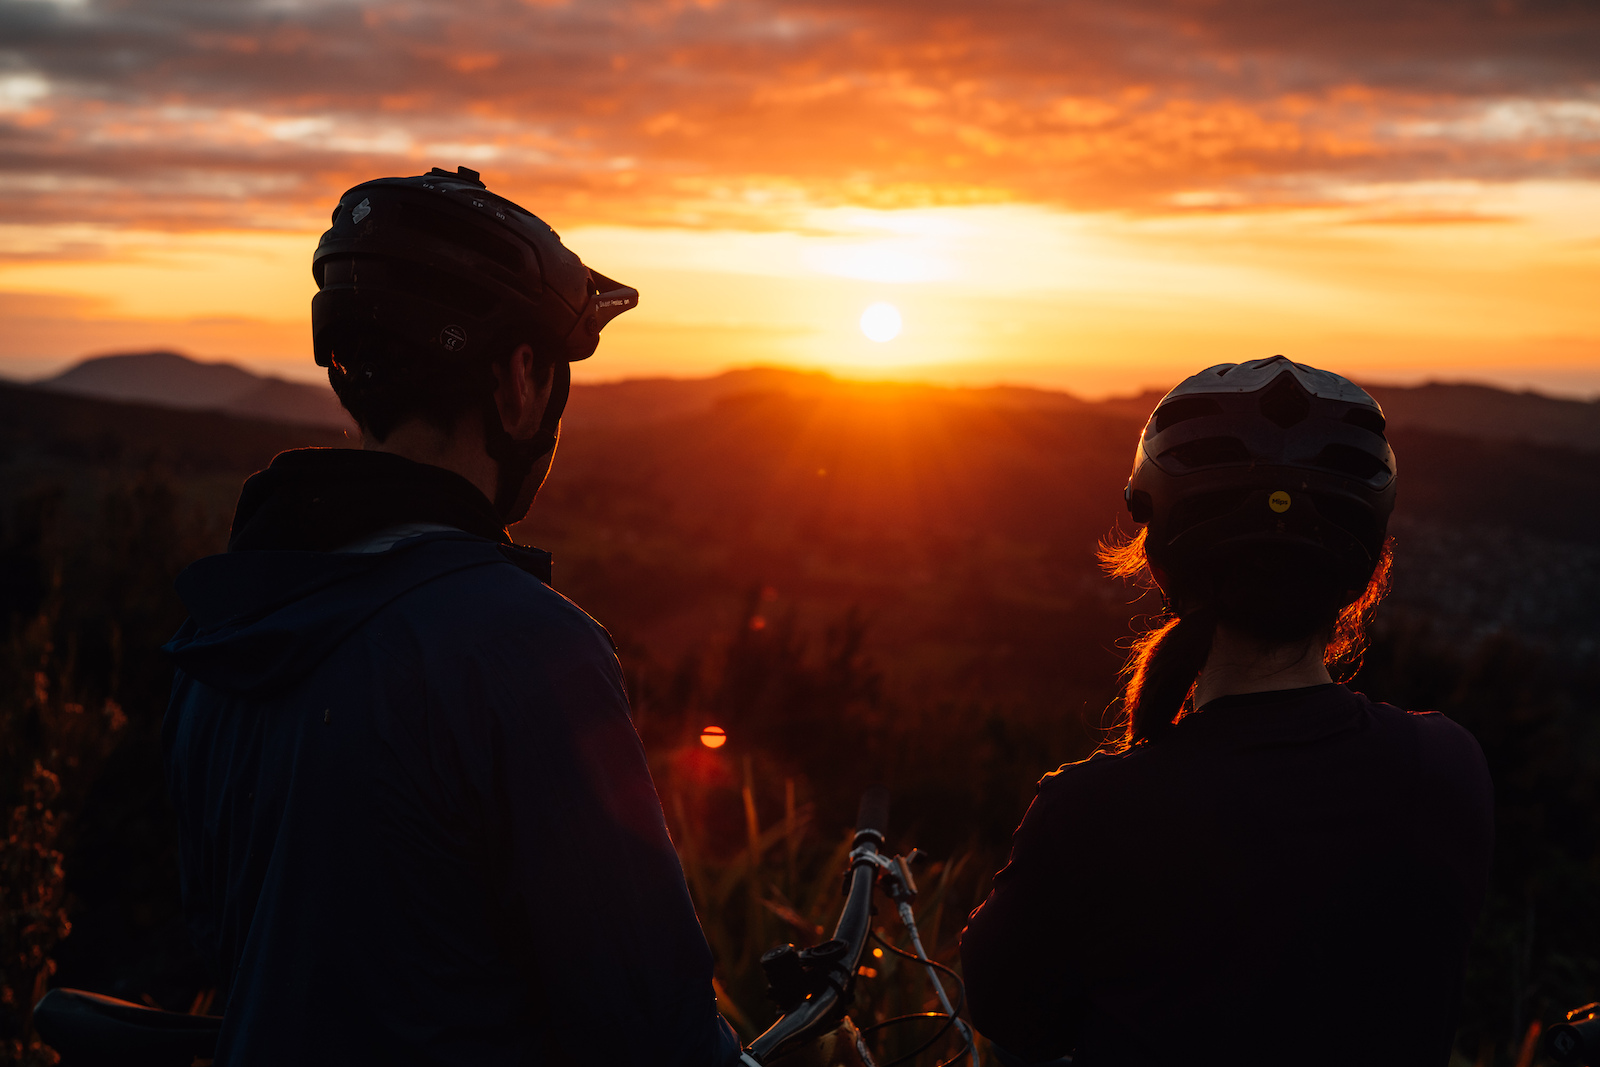 Joe and Katy taking in a gorgeous Dunedin sunrise waiting for the light to get right before heading down.